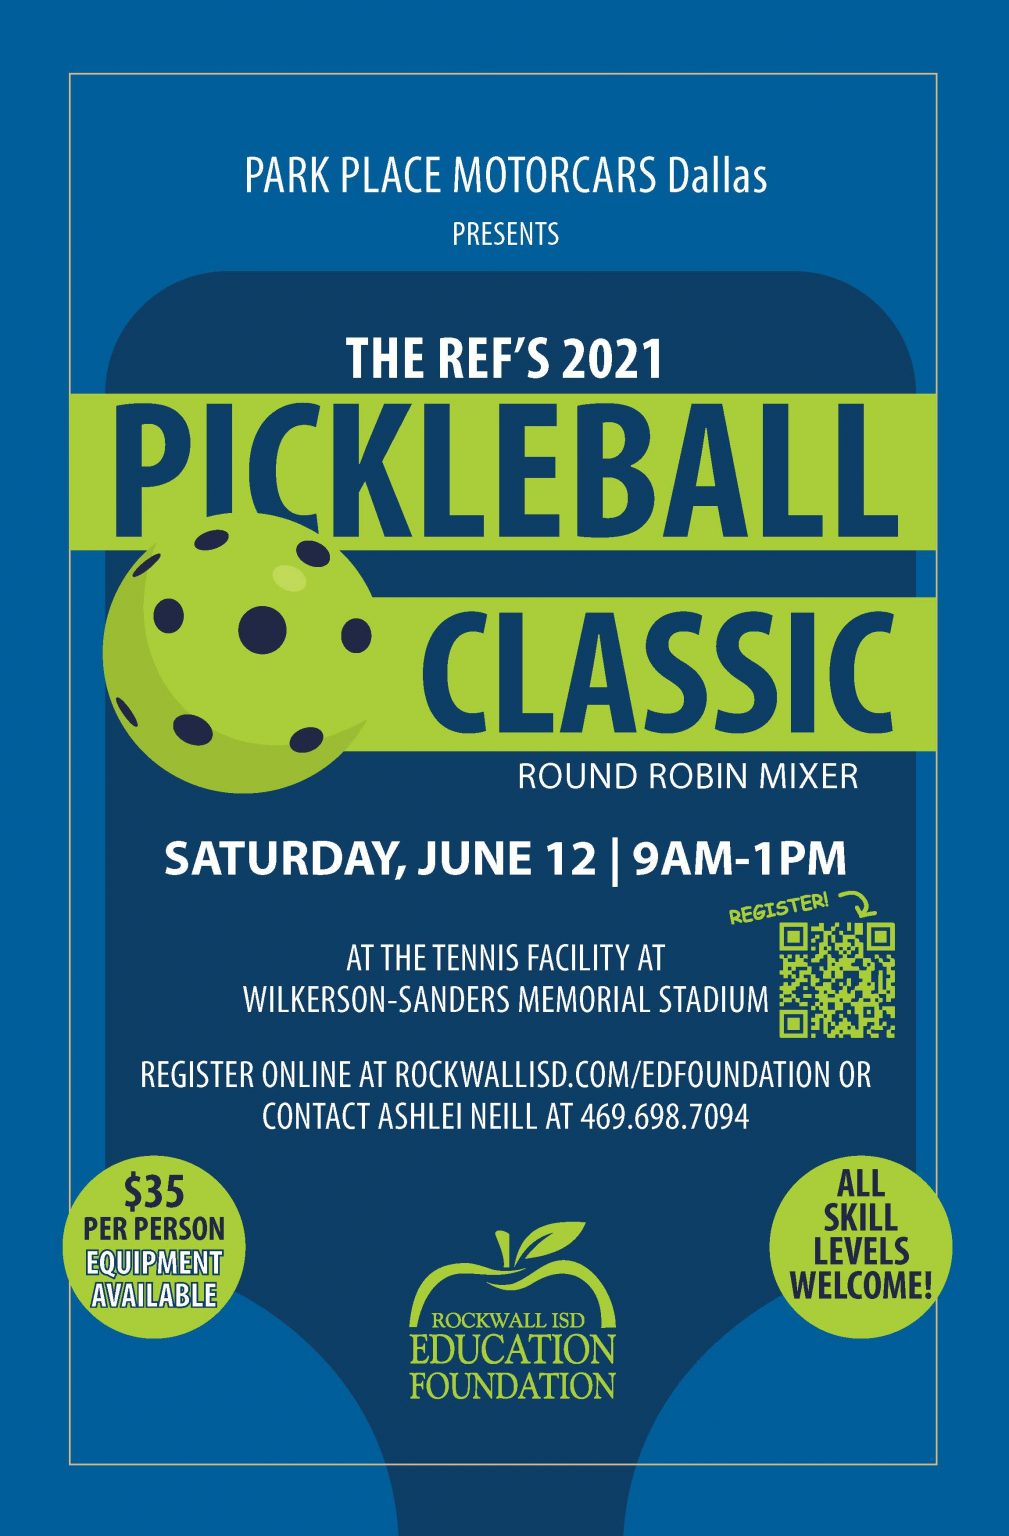 Rockwall Education Foundation to host Pickleball Classic, open to all